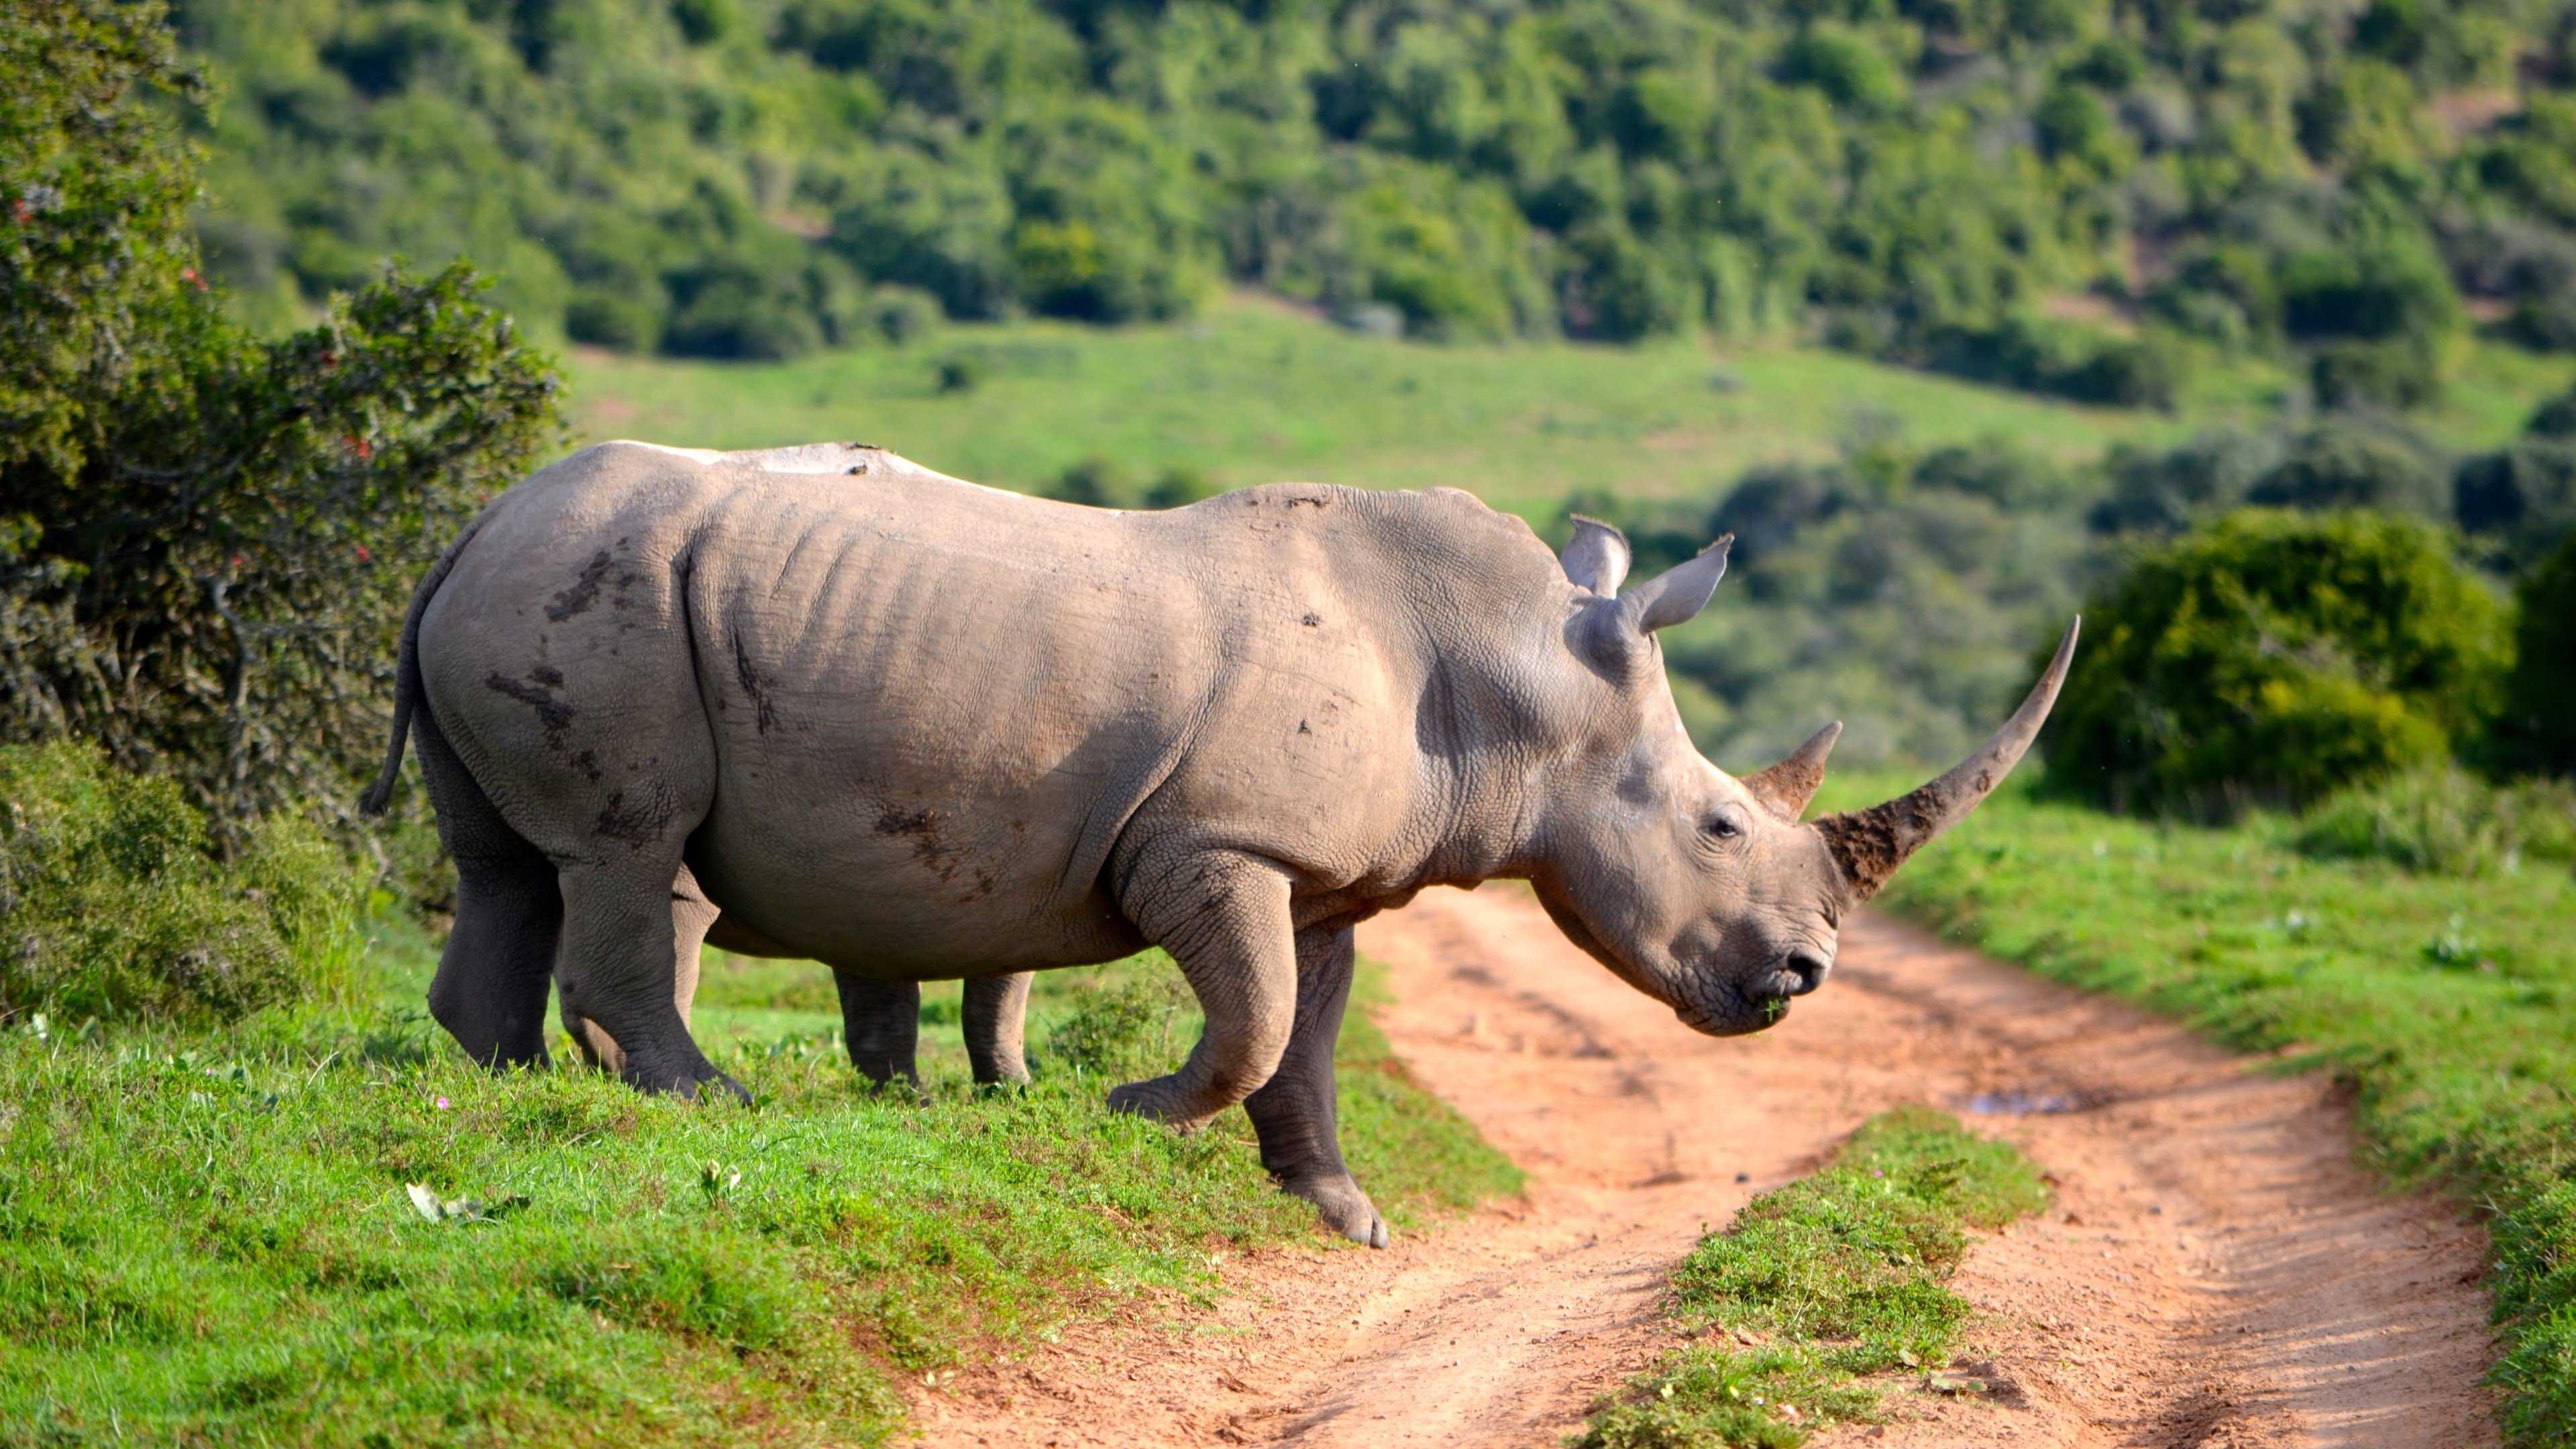 Download uhd 4k Rhino PC background ID:20084 for free